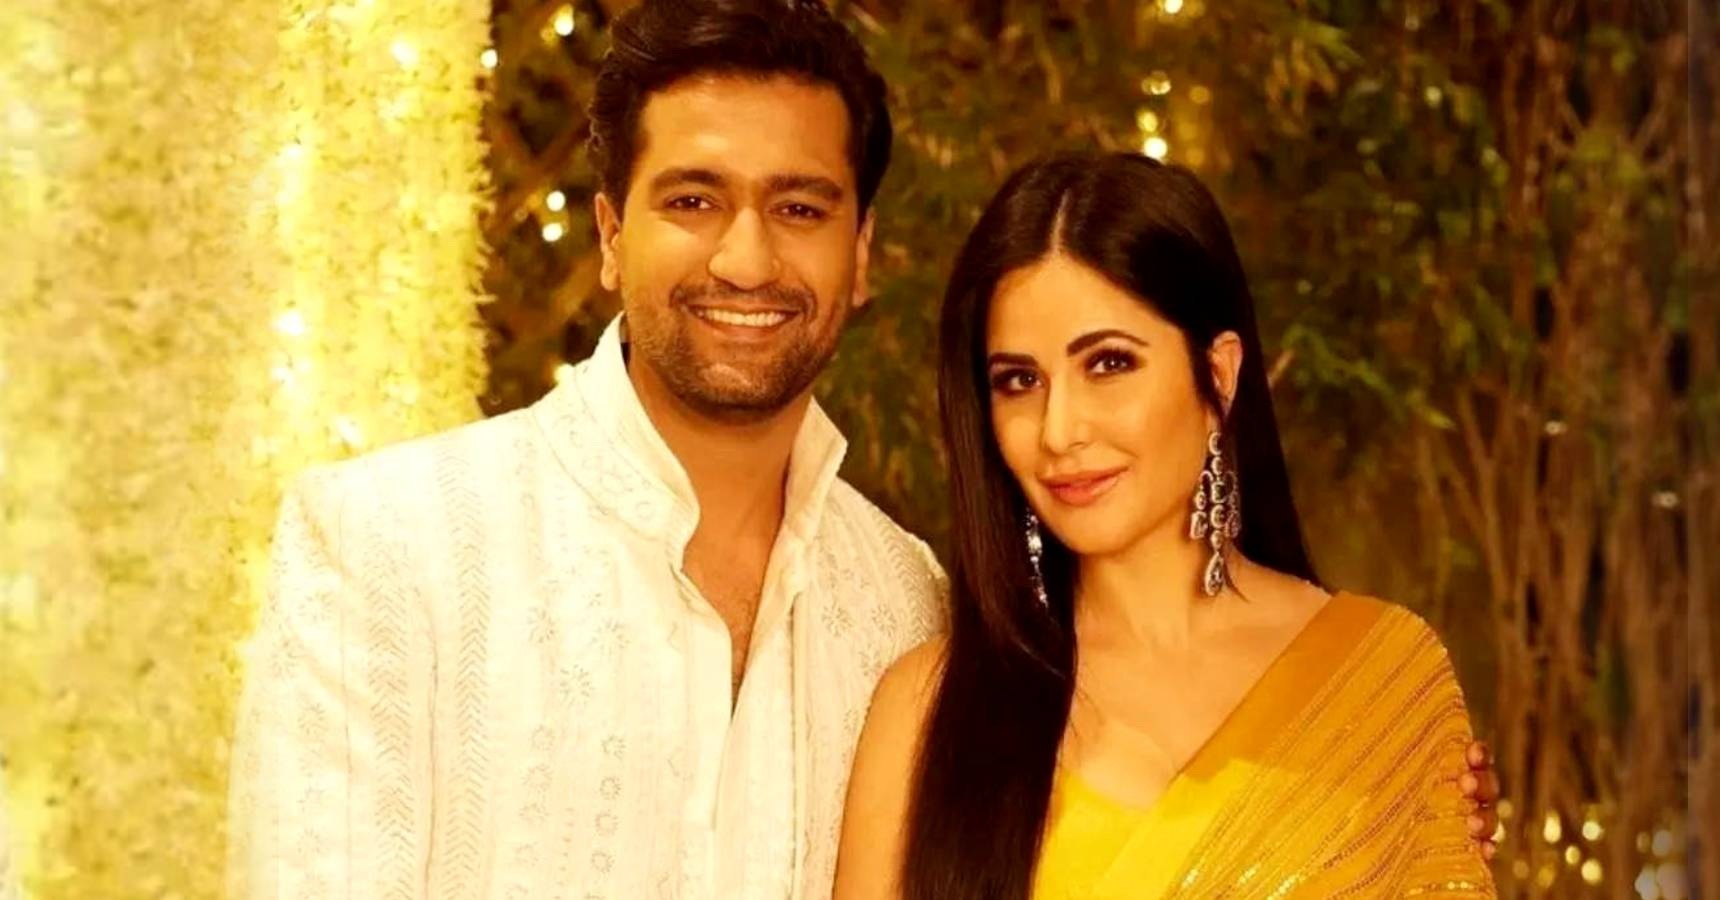 Katrina Kaif pregnancy rumours, astrologer predicts when the actress will get pregnant